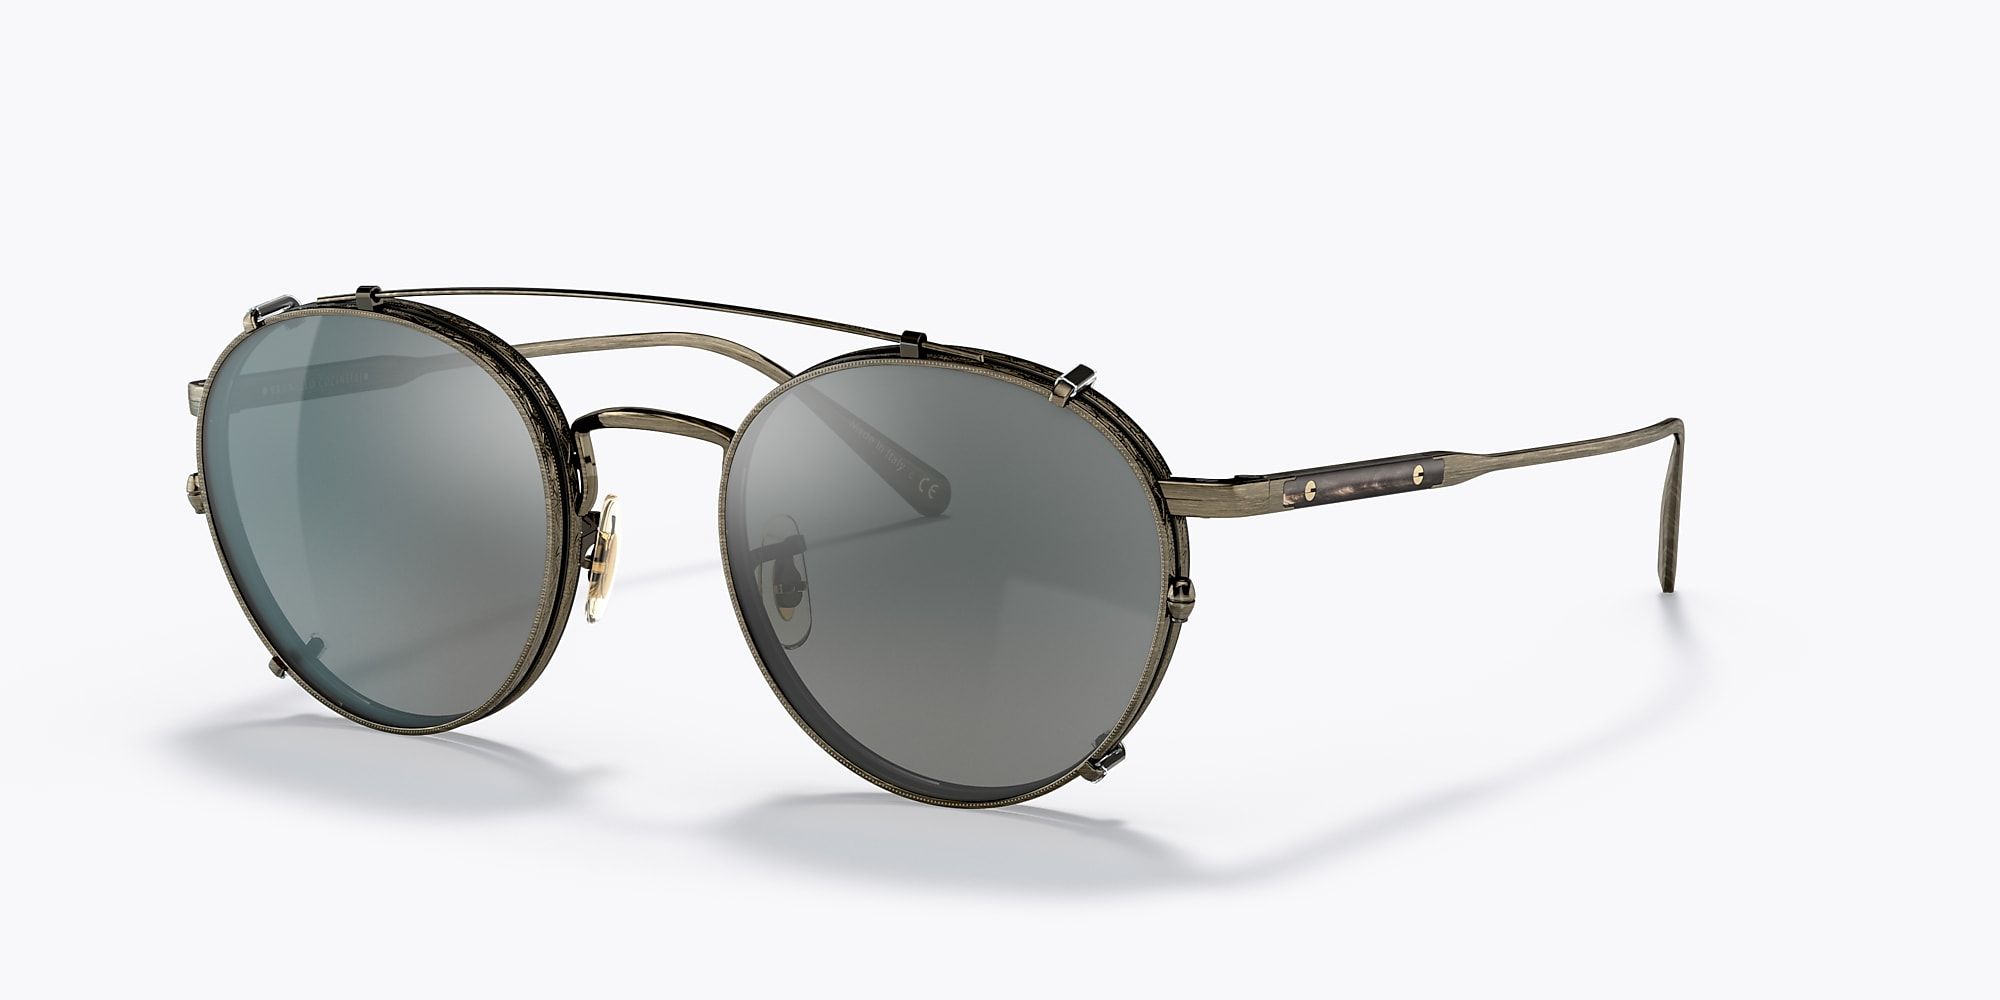 Brunello Cucinelli and Oliver Peoples Are Paying Homage to Home 